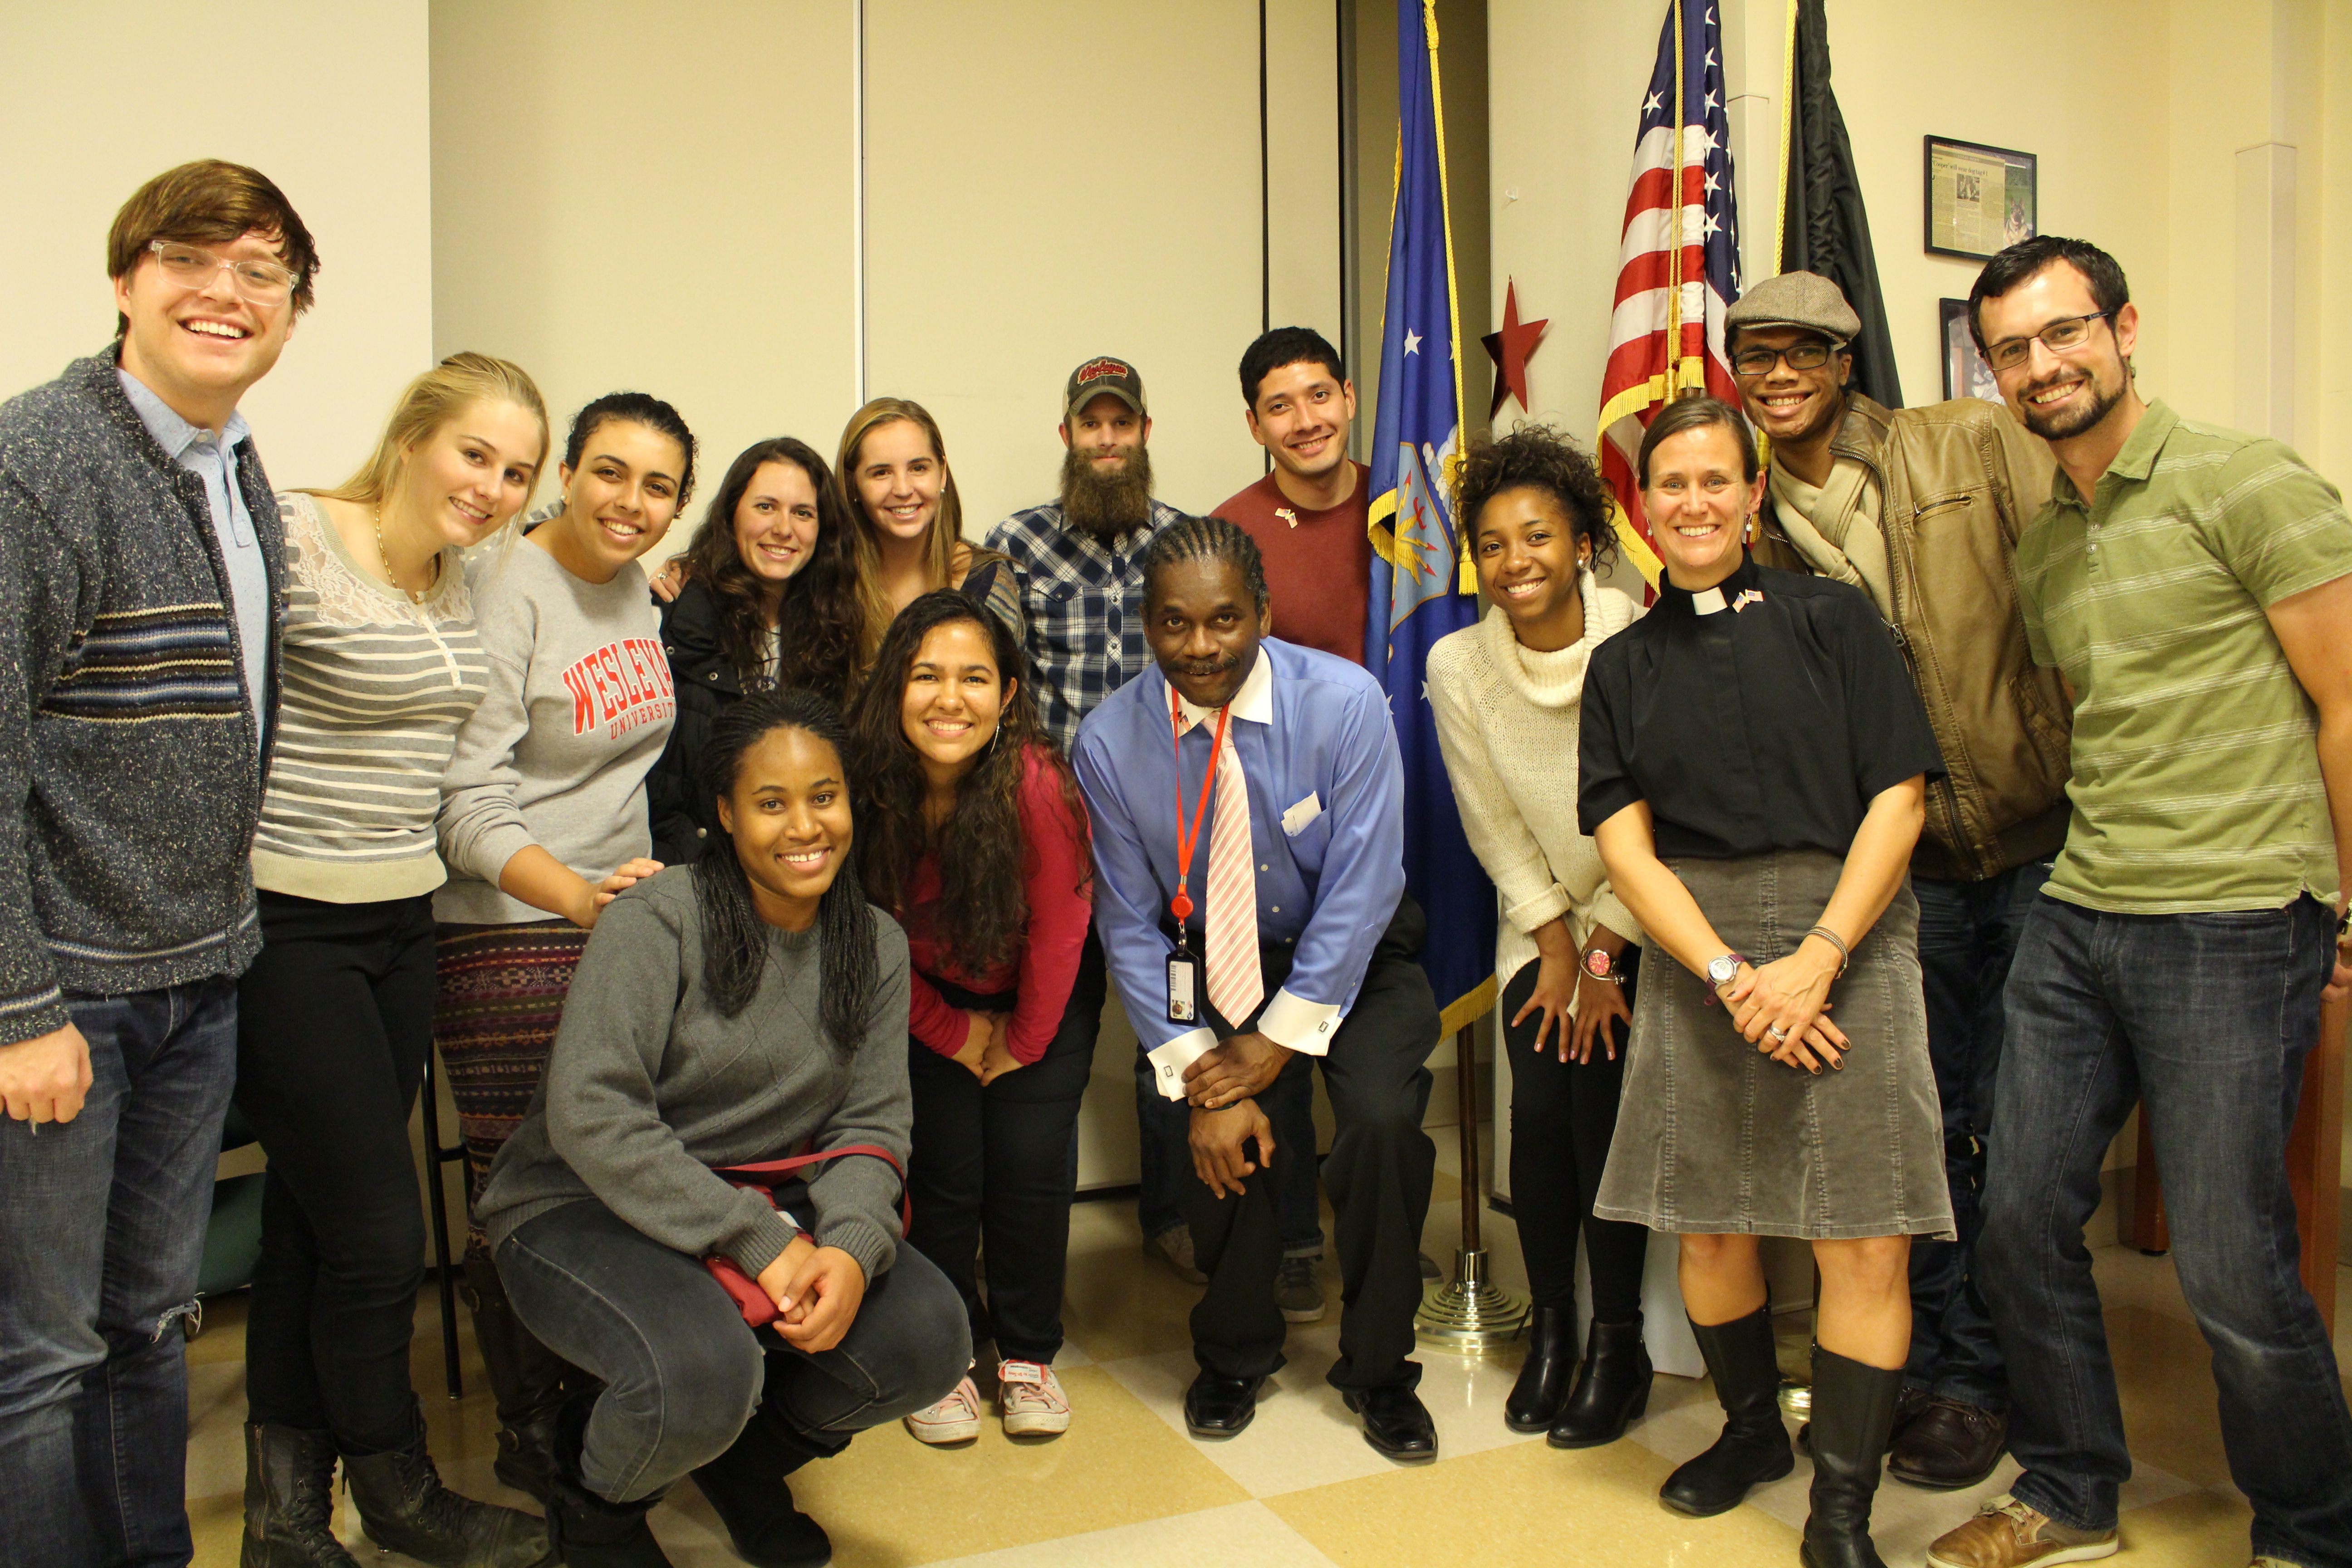 A group of Wesleyan students, led by University Protestant Chaplain Tracy Mehr-Muska, visited the Connecticut State Veterans Home in Rocky Hill on Nov. 8, just ahead of Veterans Day. The twelve students—including two Posse Veteran Scholars—visited with the veterans, sang patriotic songs, and pinned American flag pins on their lapels in honor of their military service. They were joined by Mehr-Muska's chaplain intern from Yale Divinity School, Jonathan Heinly, and the chaplain at the Veterans Home. Among the veterans they met was a 101-year-old man who served as a member of the Tuskegee Airmen.